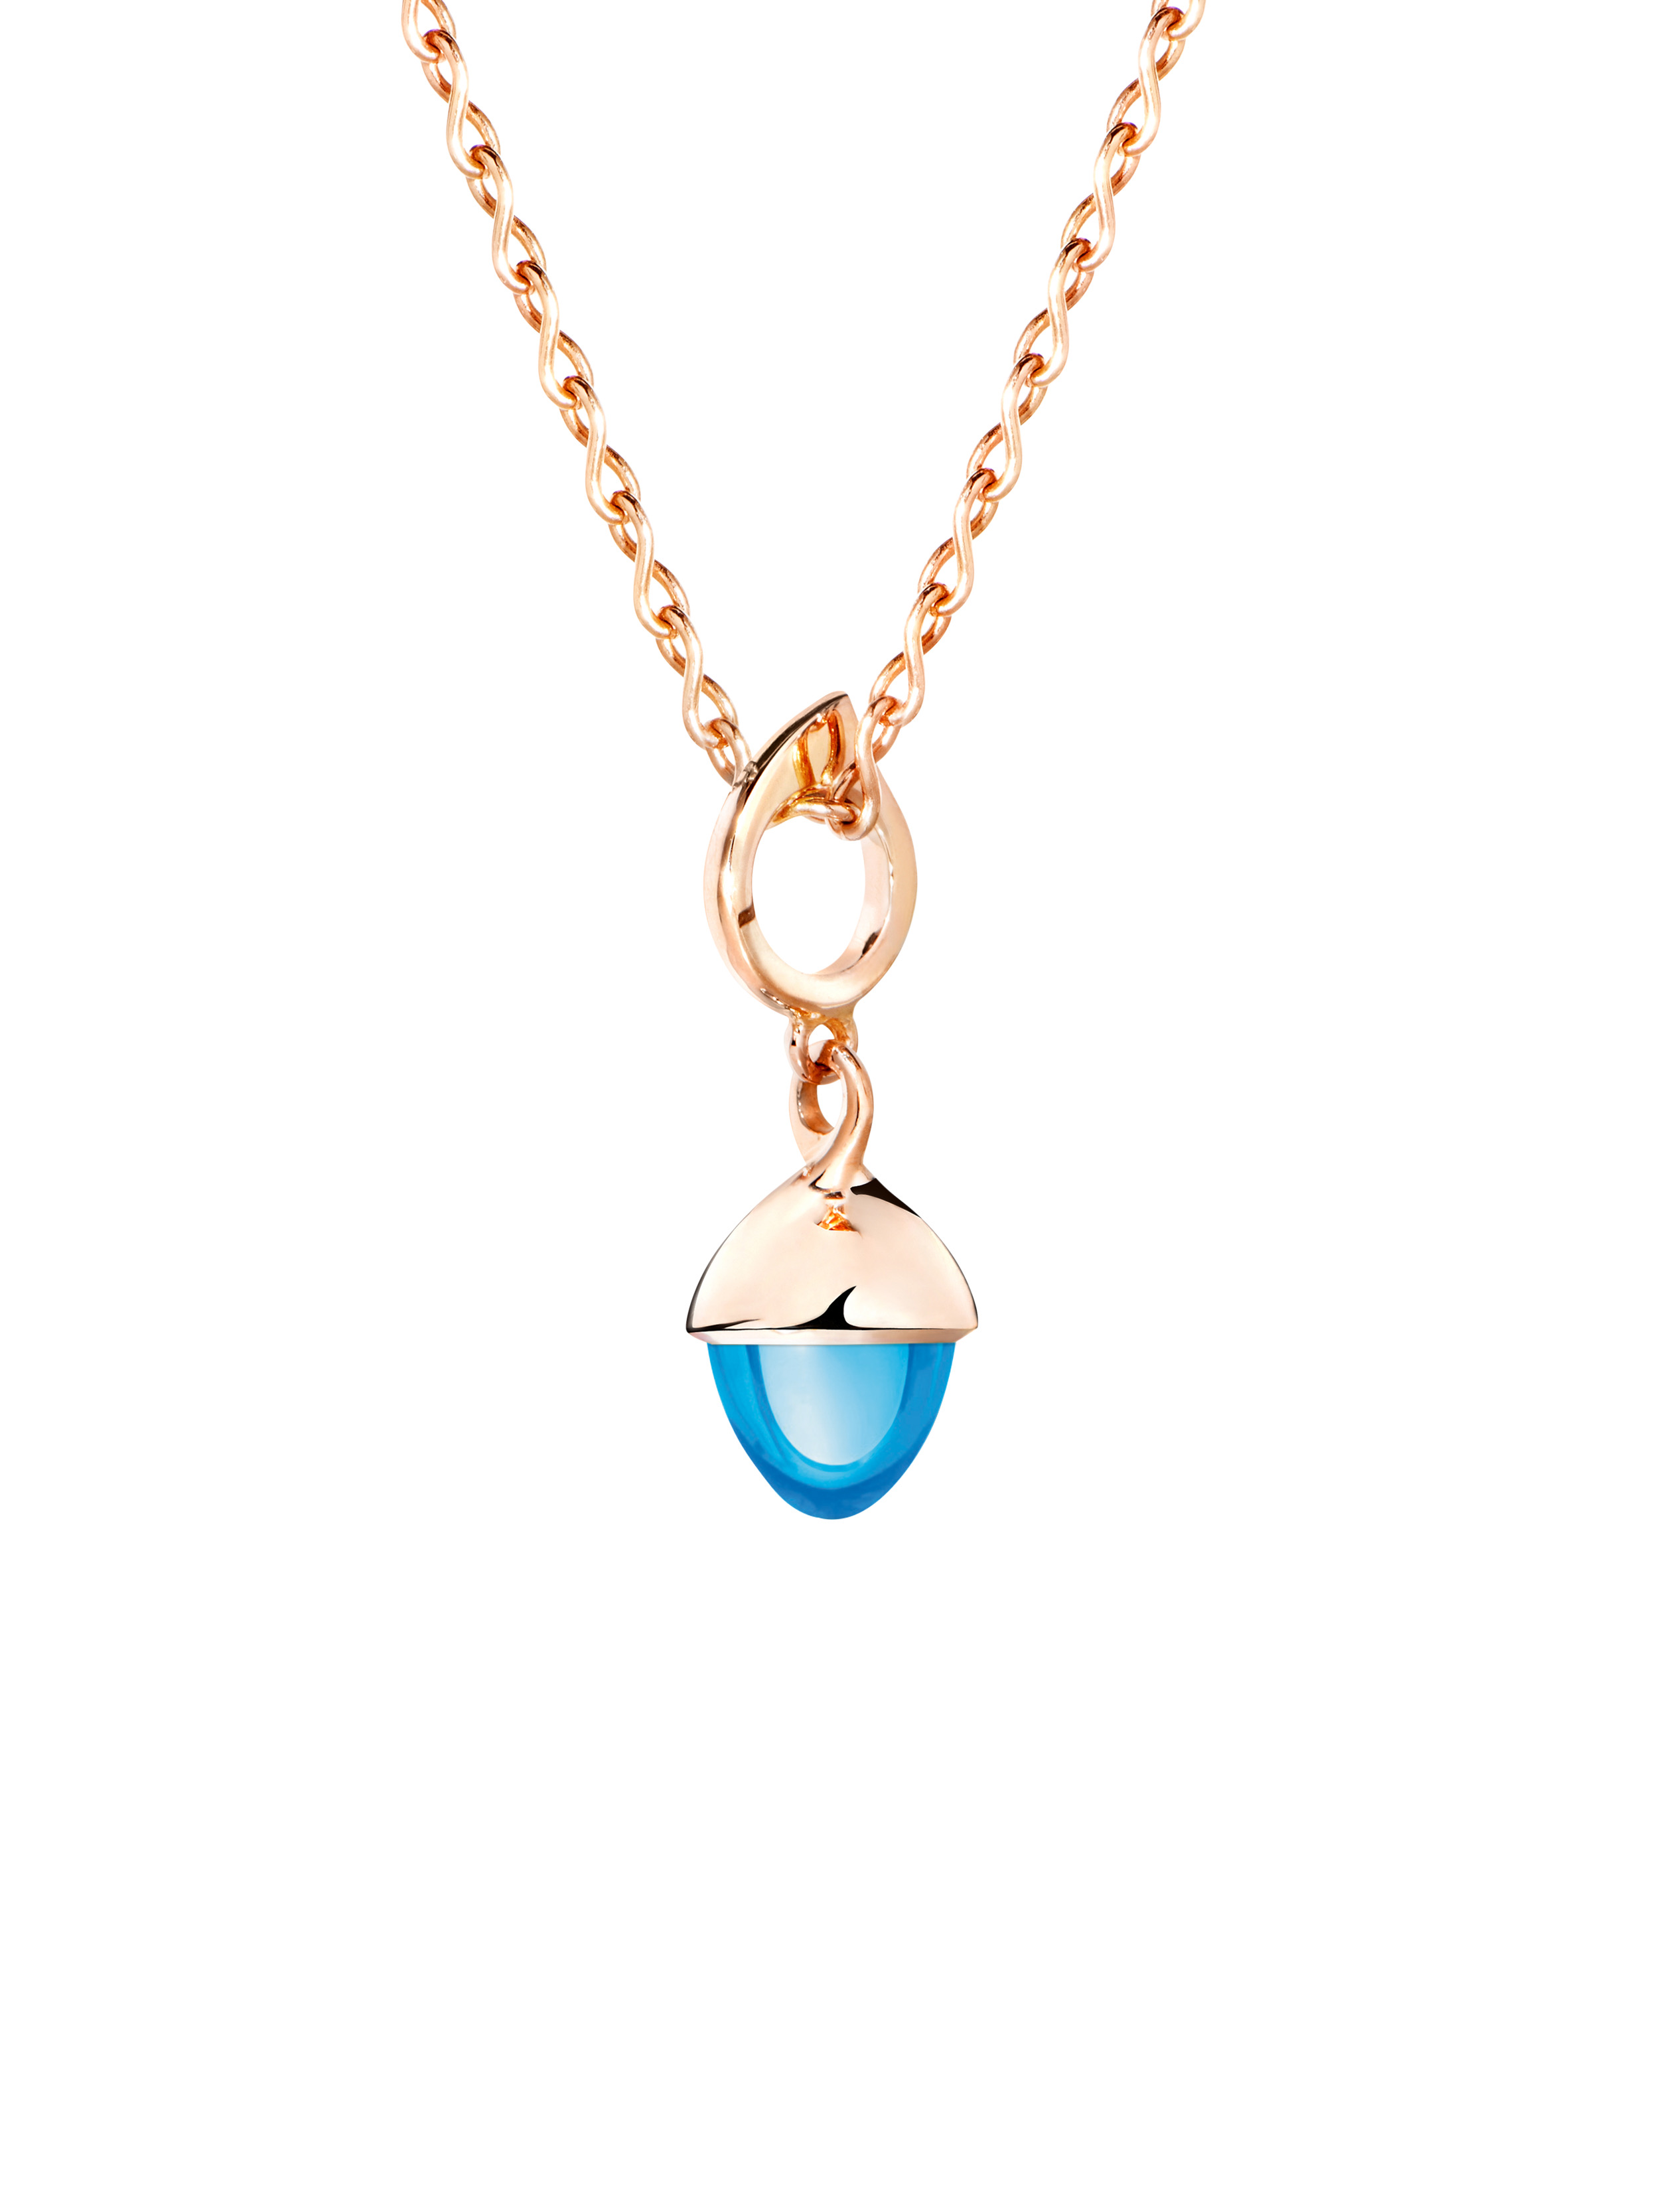 18k Rose Gold and Topaz Pendant Necklace